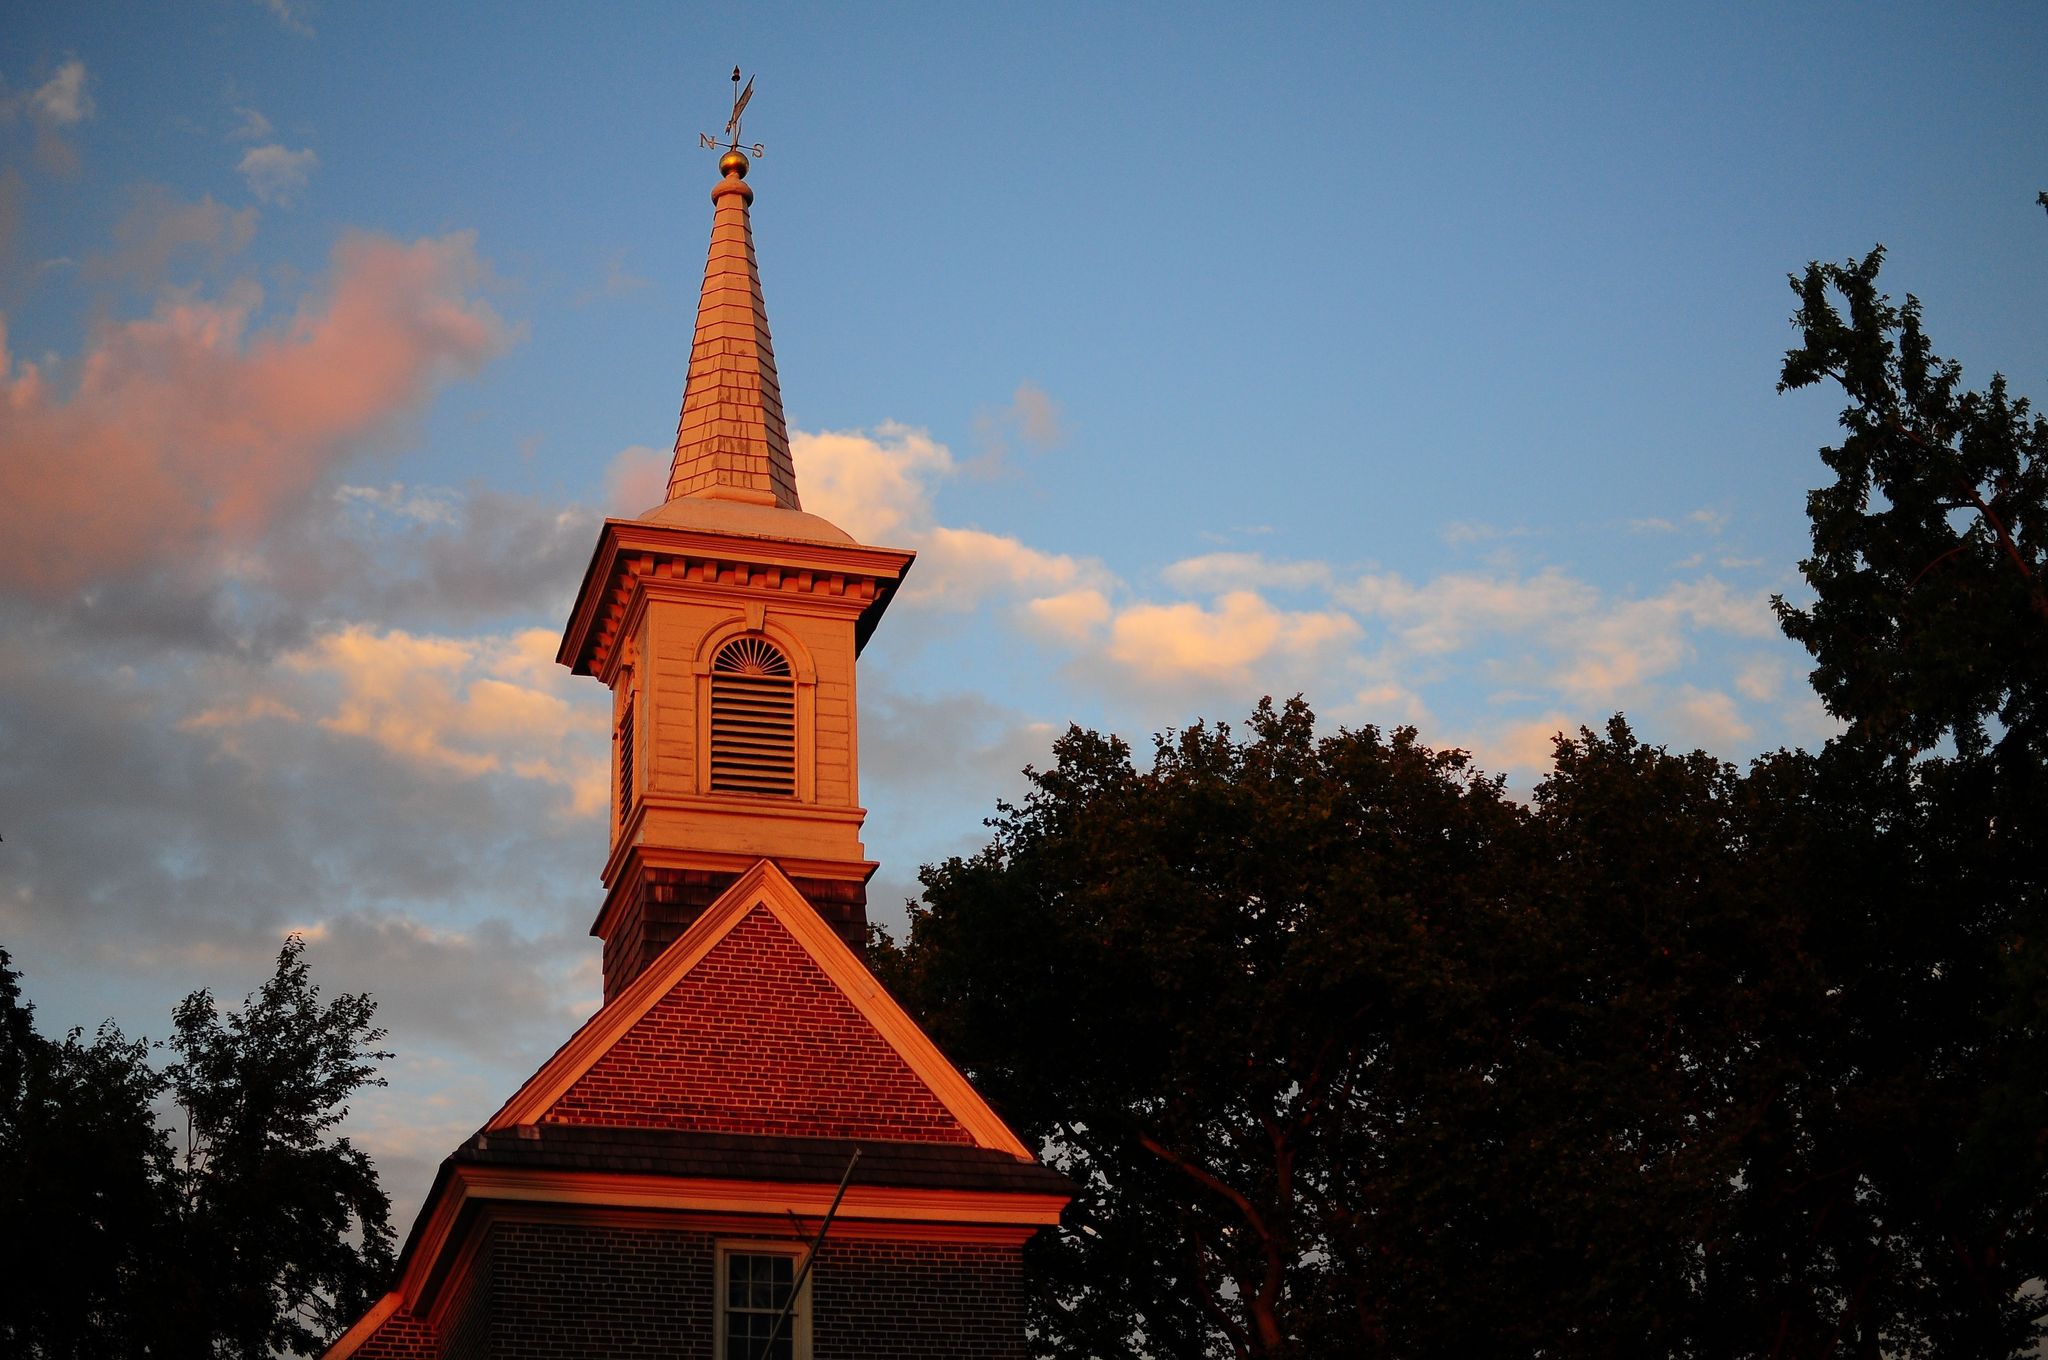 The church building at Gloria Dei 'Old Swedes' has been in use since 1700, making it the oldest church building in Pennsylvania and the second oldest in the United States.  The steeple was completed in 1703.